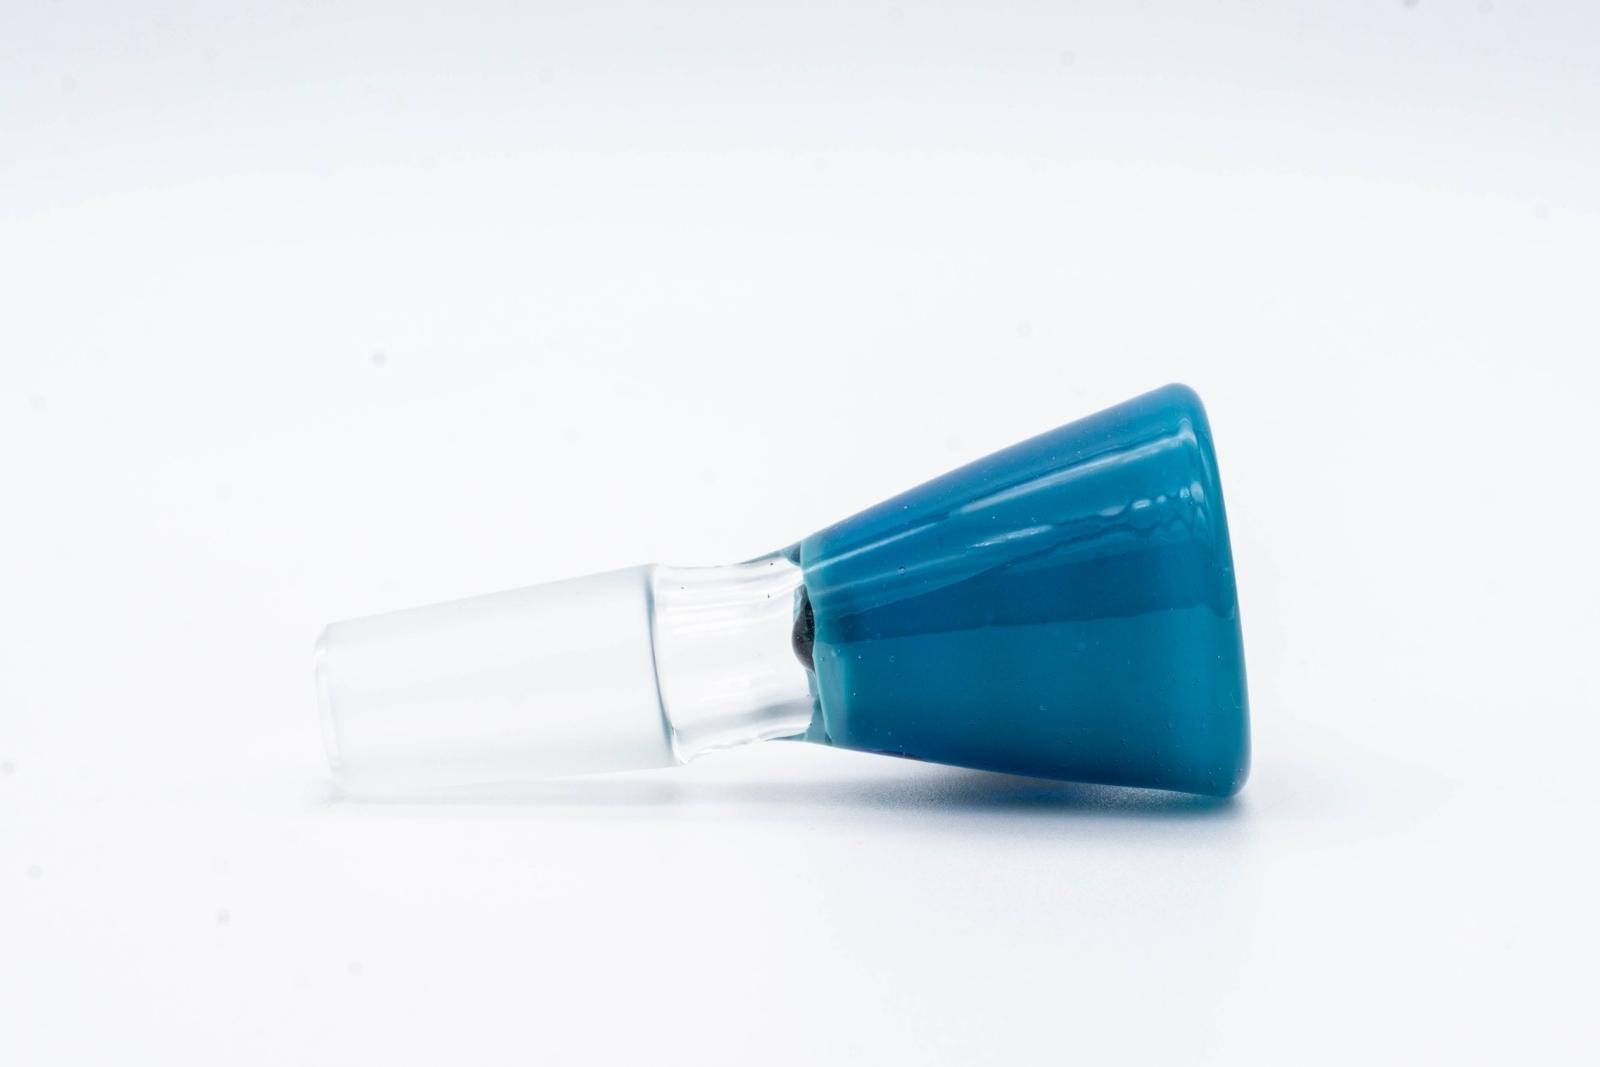 A 14mm blue slide made by BorOregon, on a white background